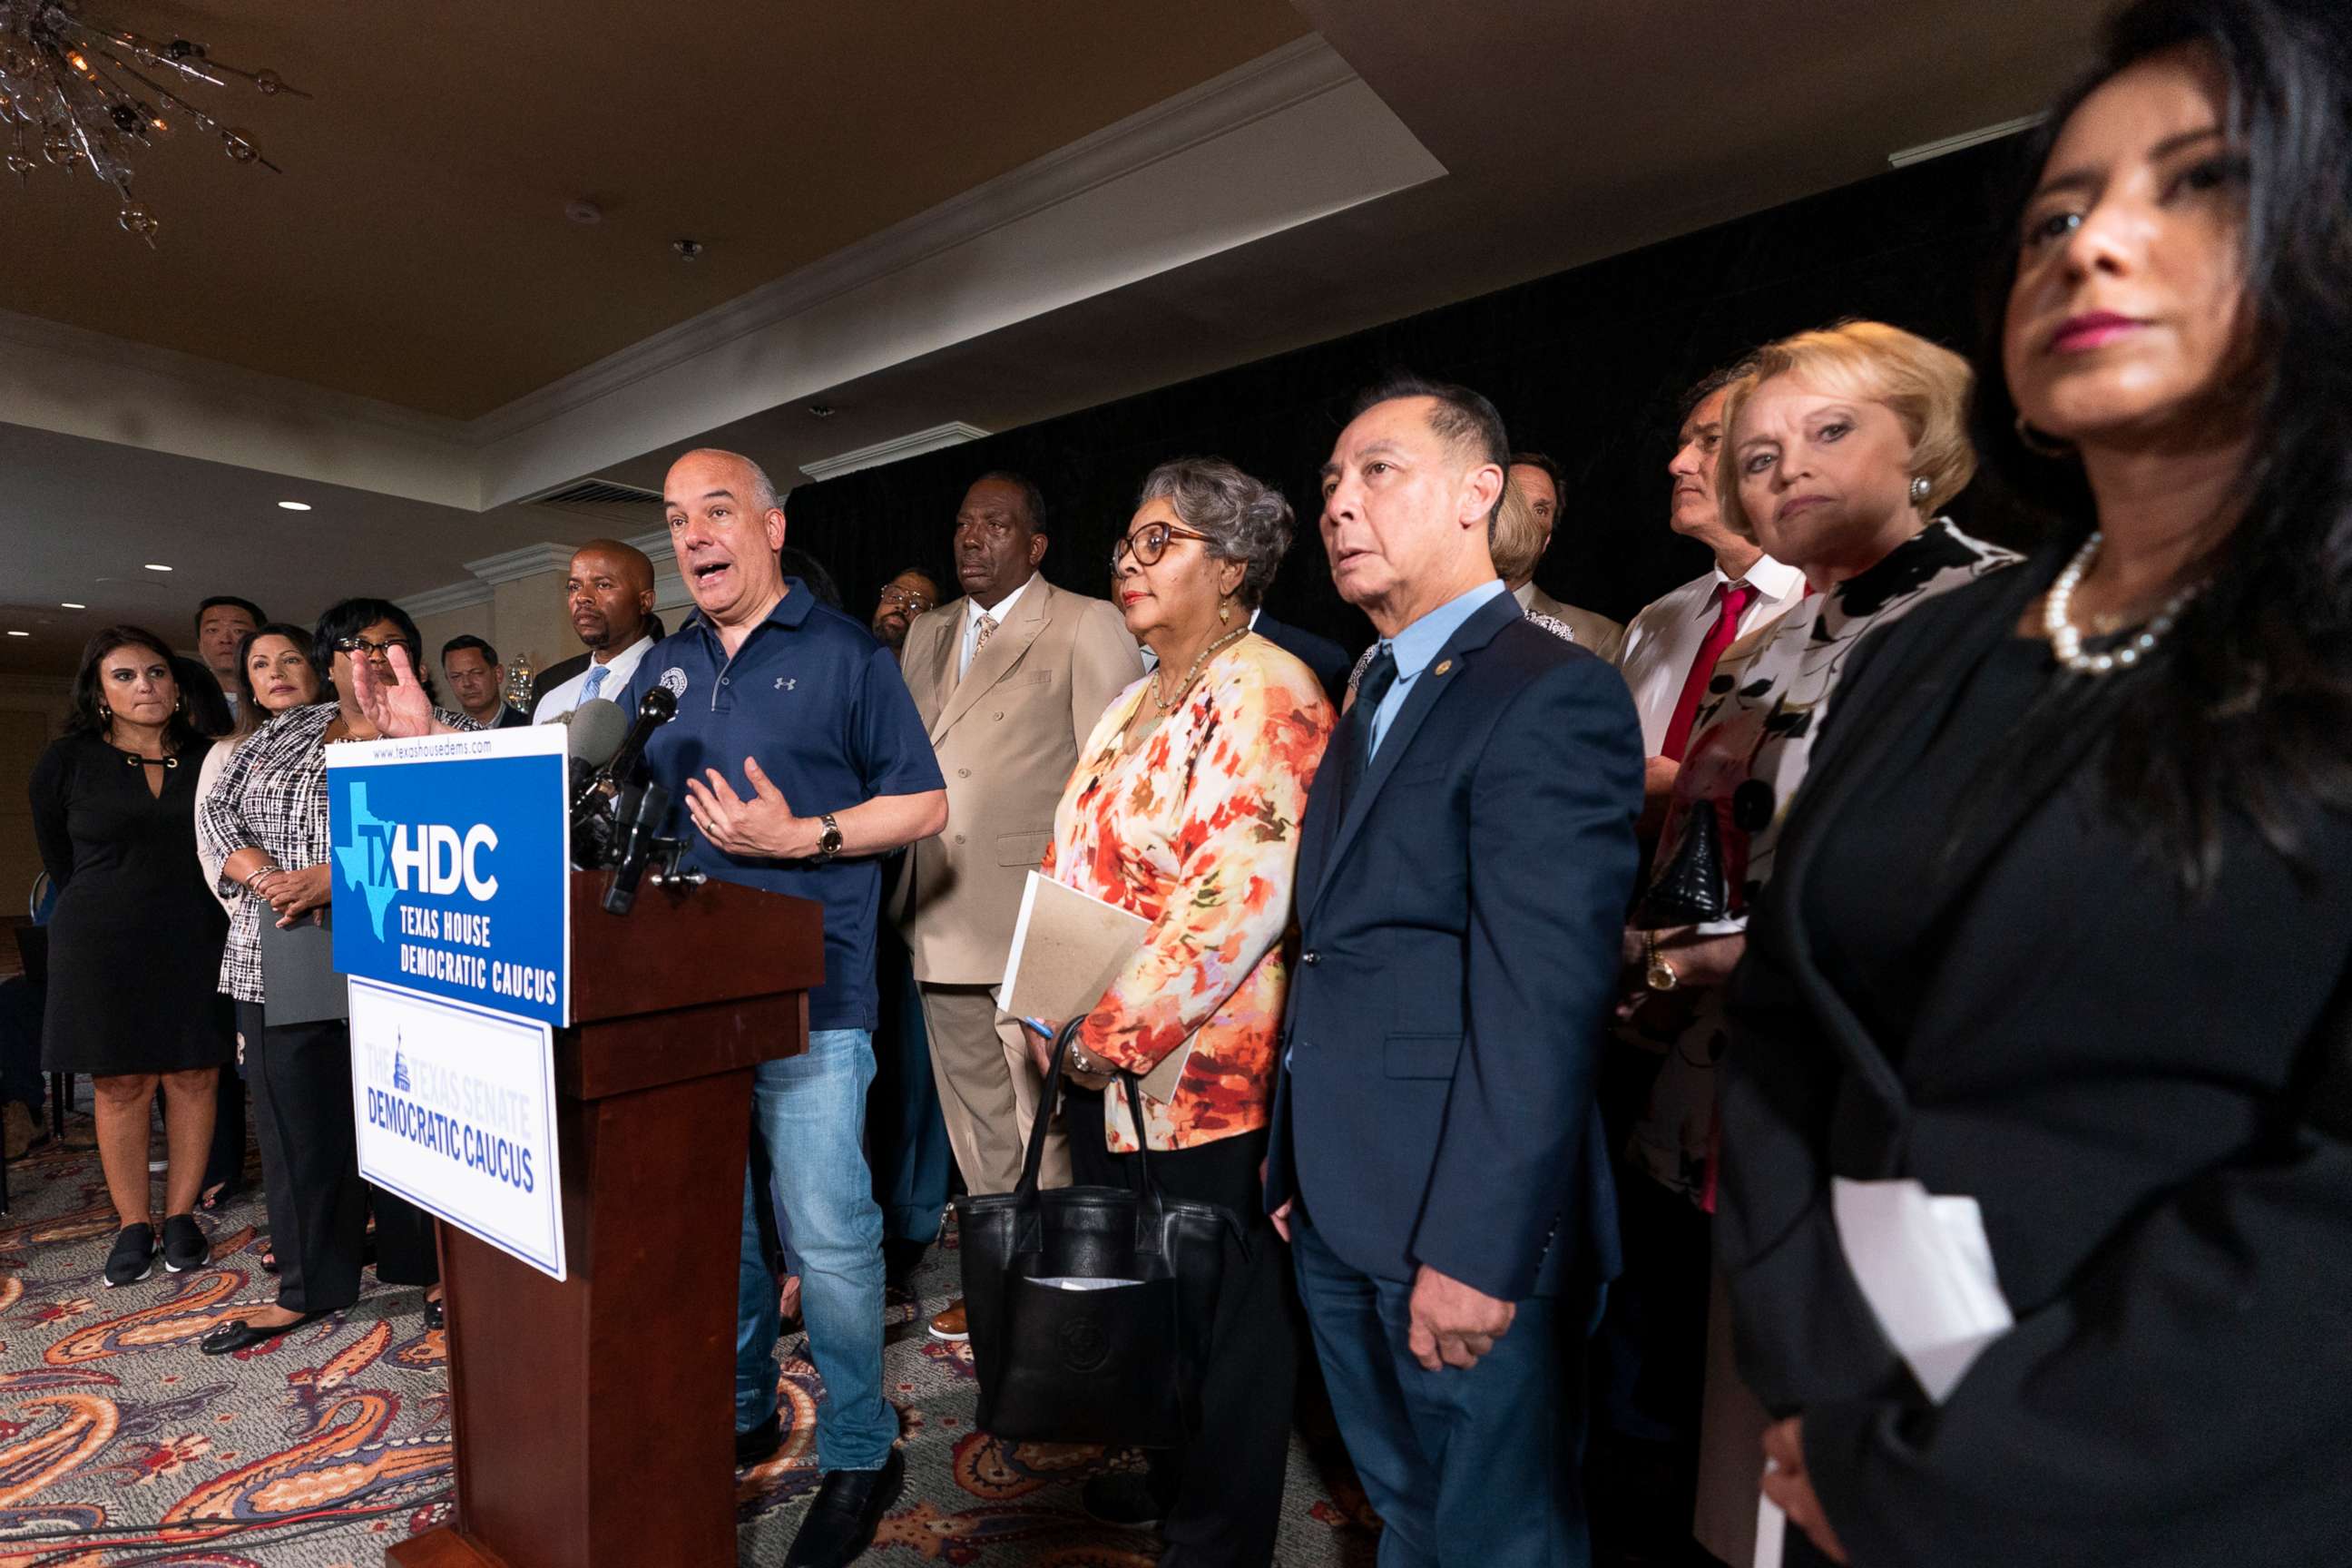 PHOTO: In this July 14, 2021, file photo, Democratic Texas State Rep. Chris Turner, left, from Grand Prairie, speaks during a news conference with other Texas Democrats in Washington, D.C.